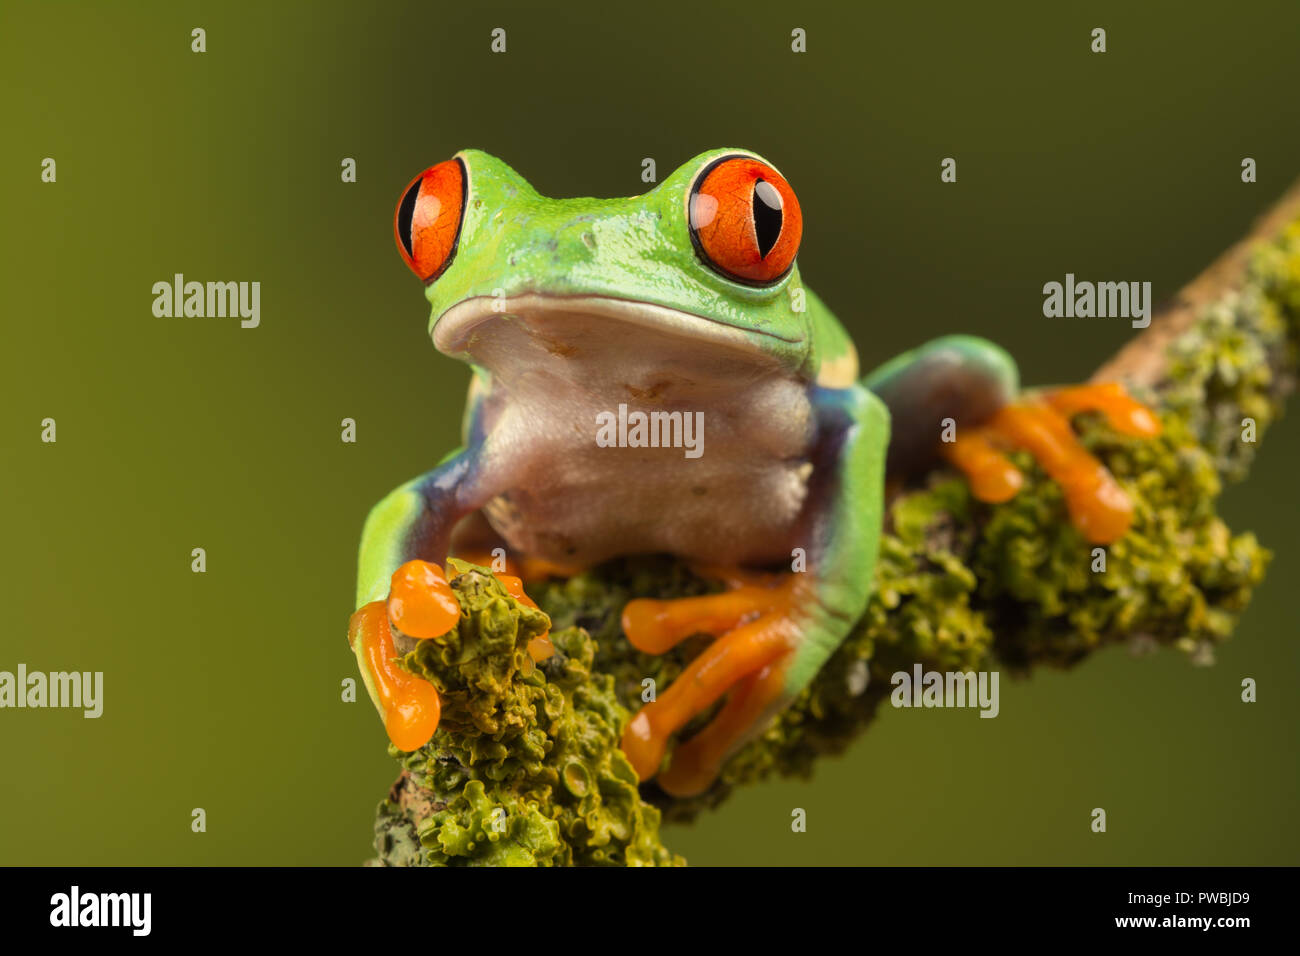 Close-up of red-eyed tree frog (Agalychnis callidryas), a colourful amphibian species, on a twig Stock Photo